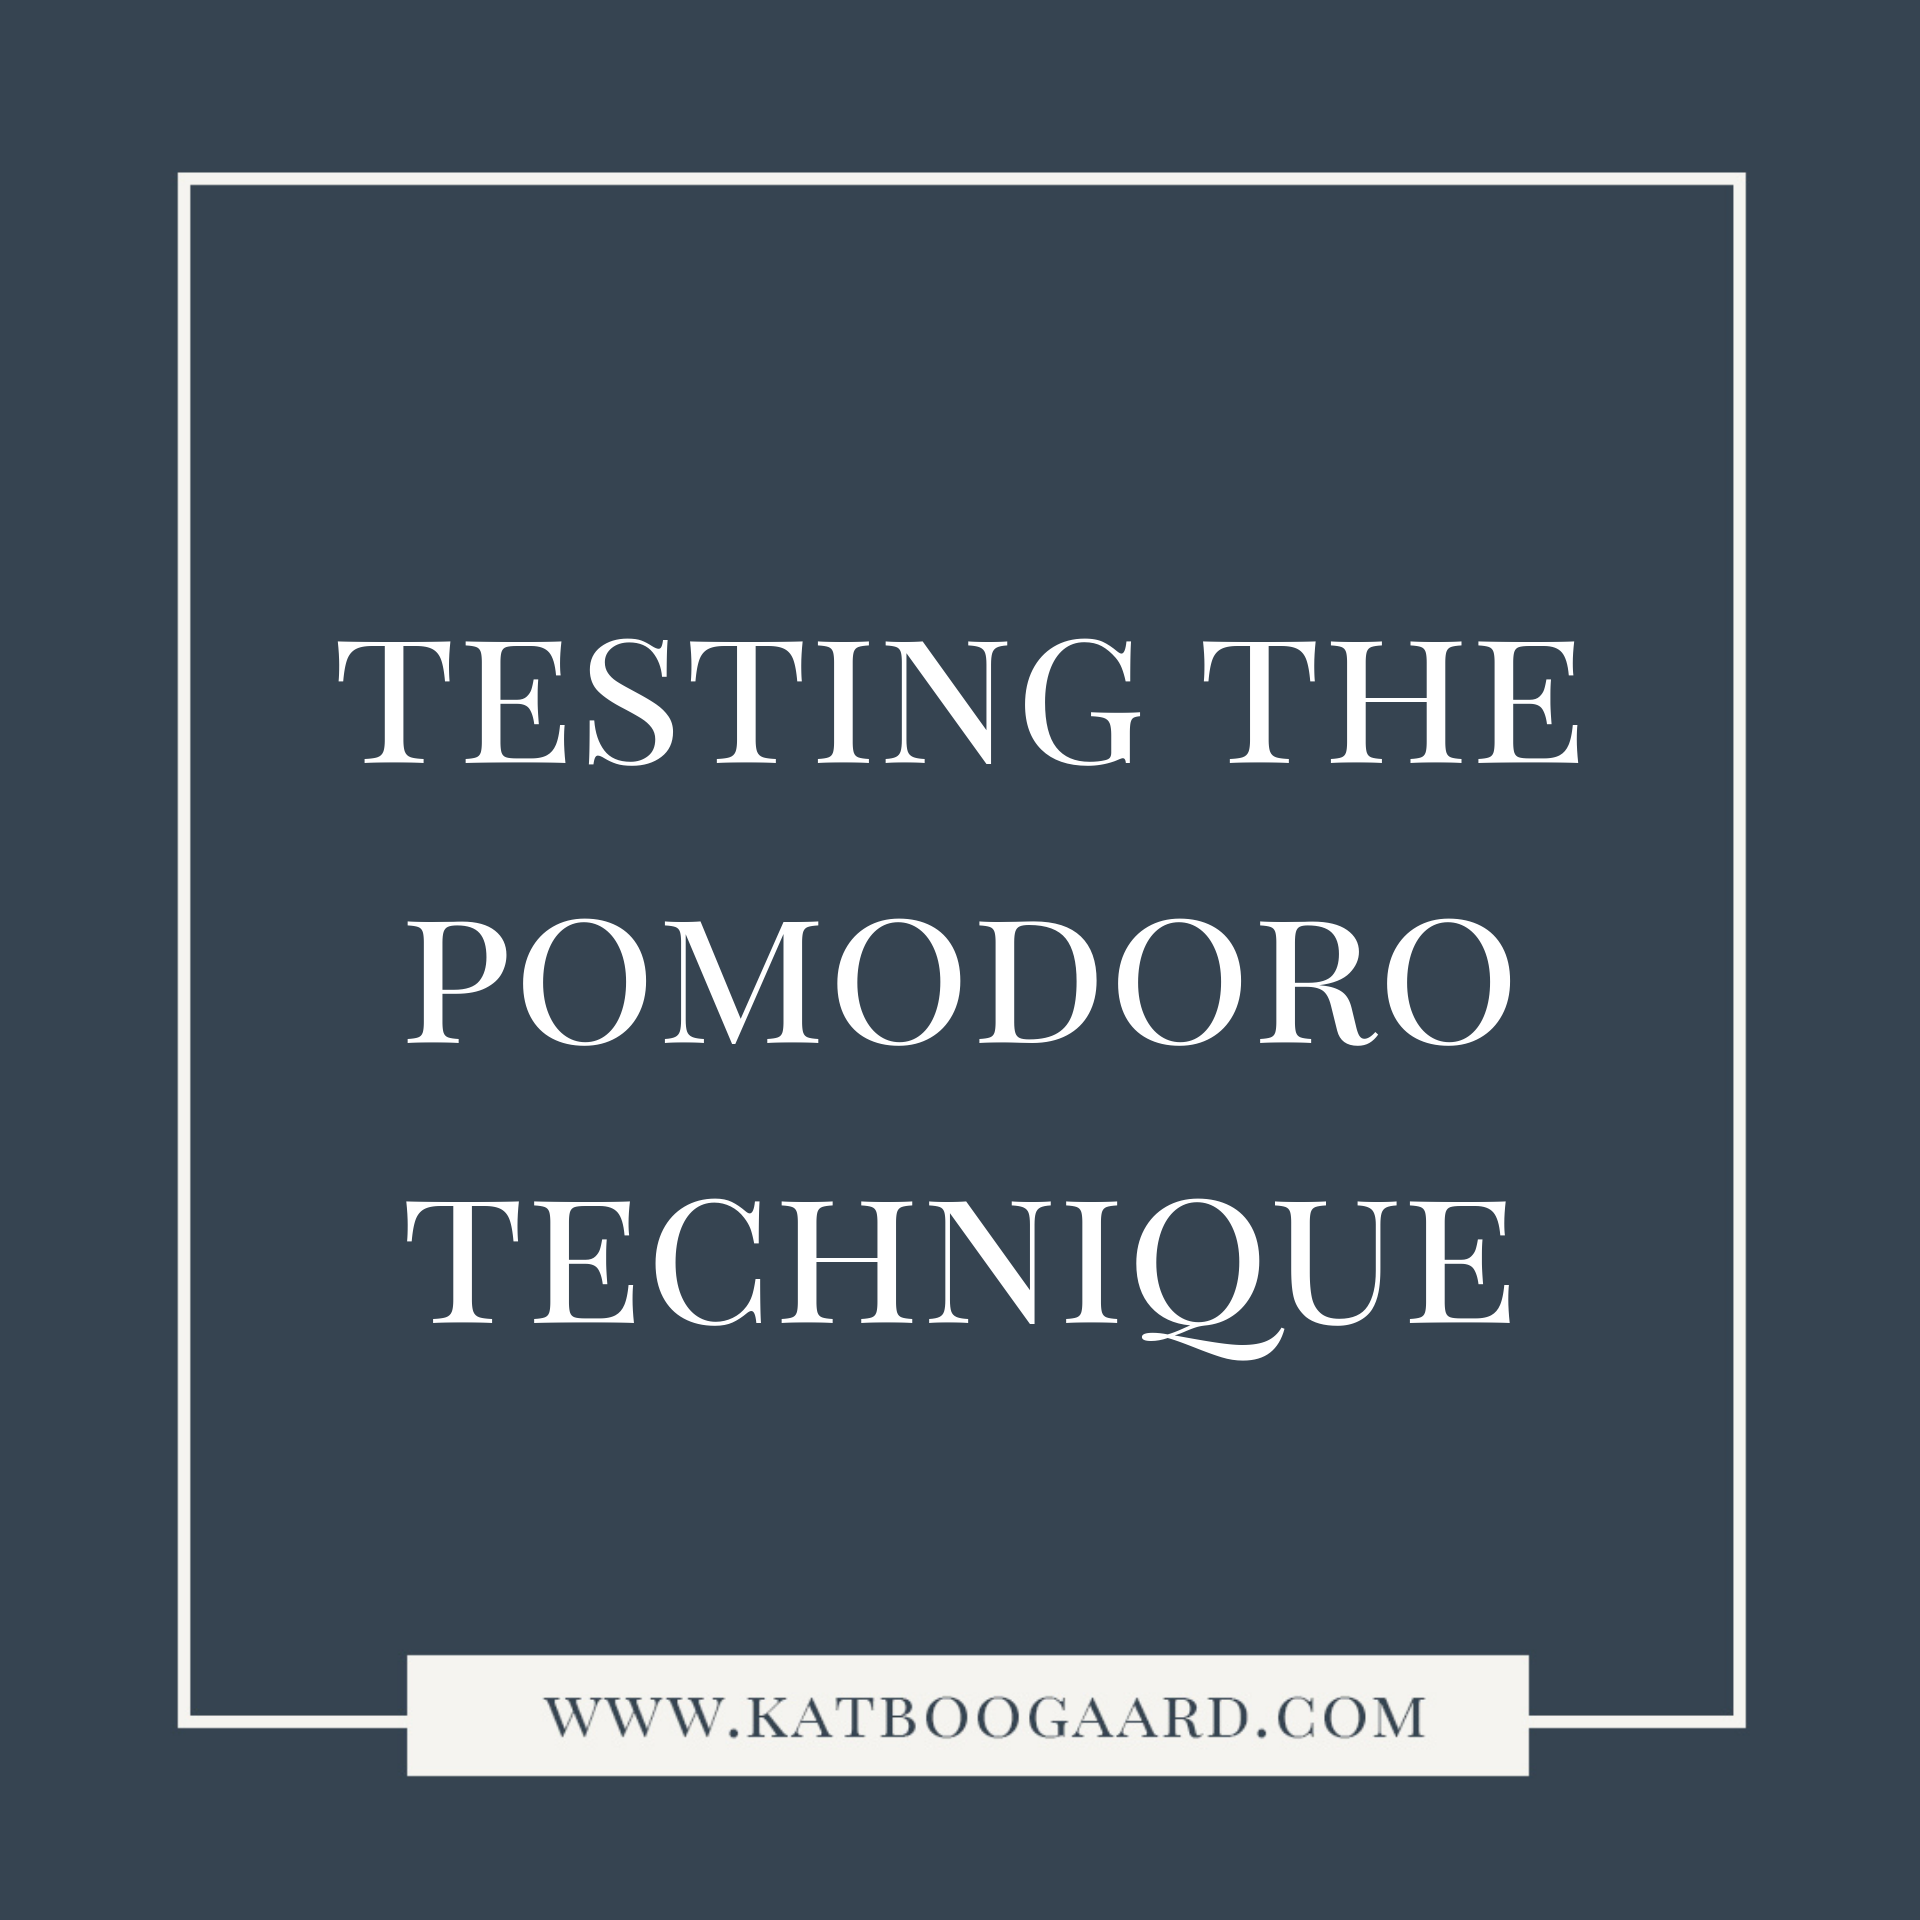 What Happened When I Tested the Pomodoro Technique - Kat Boogaard